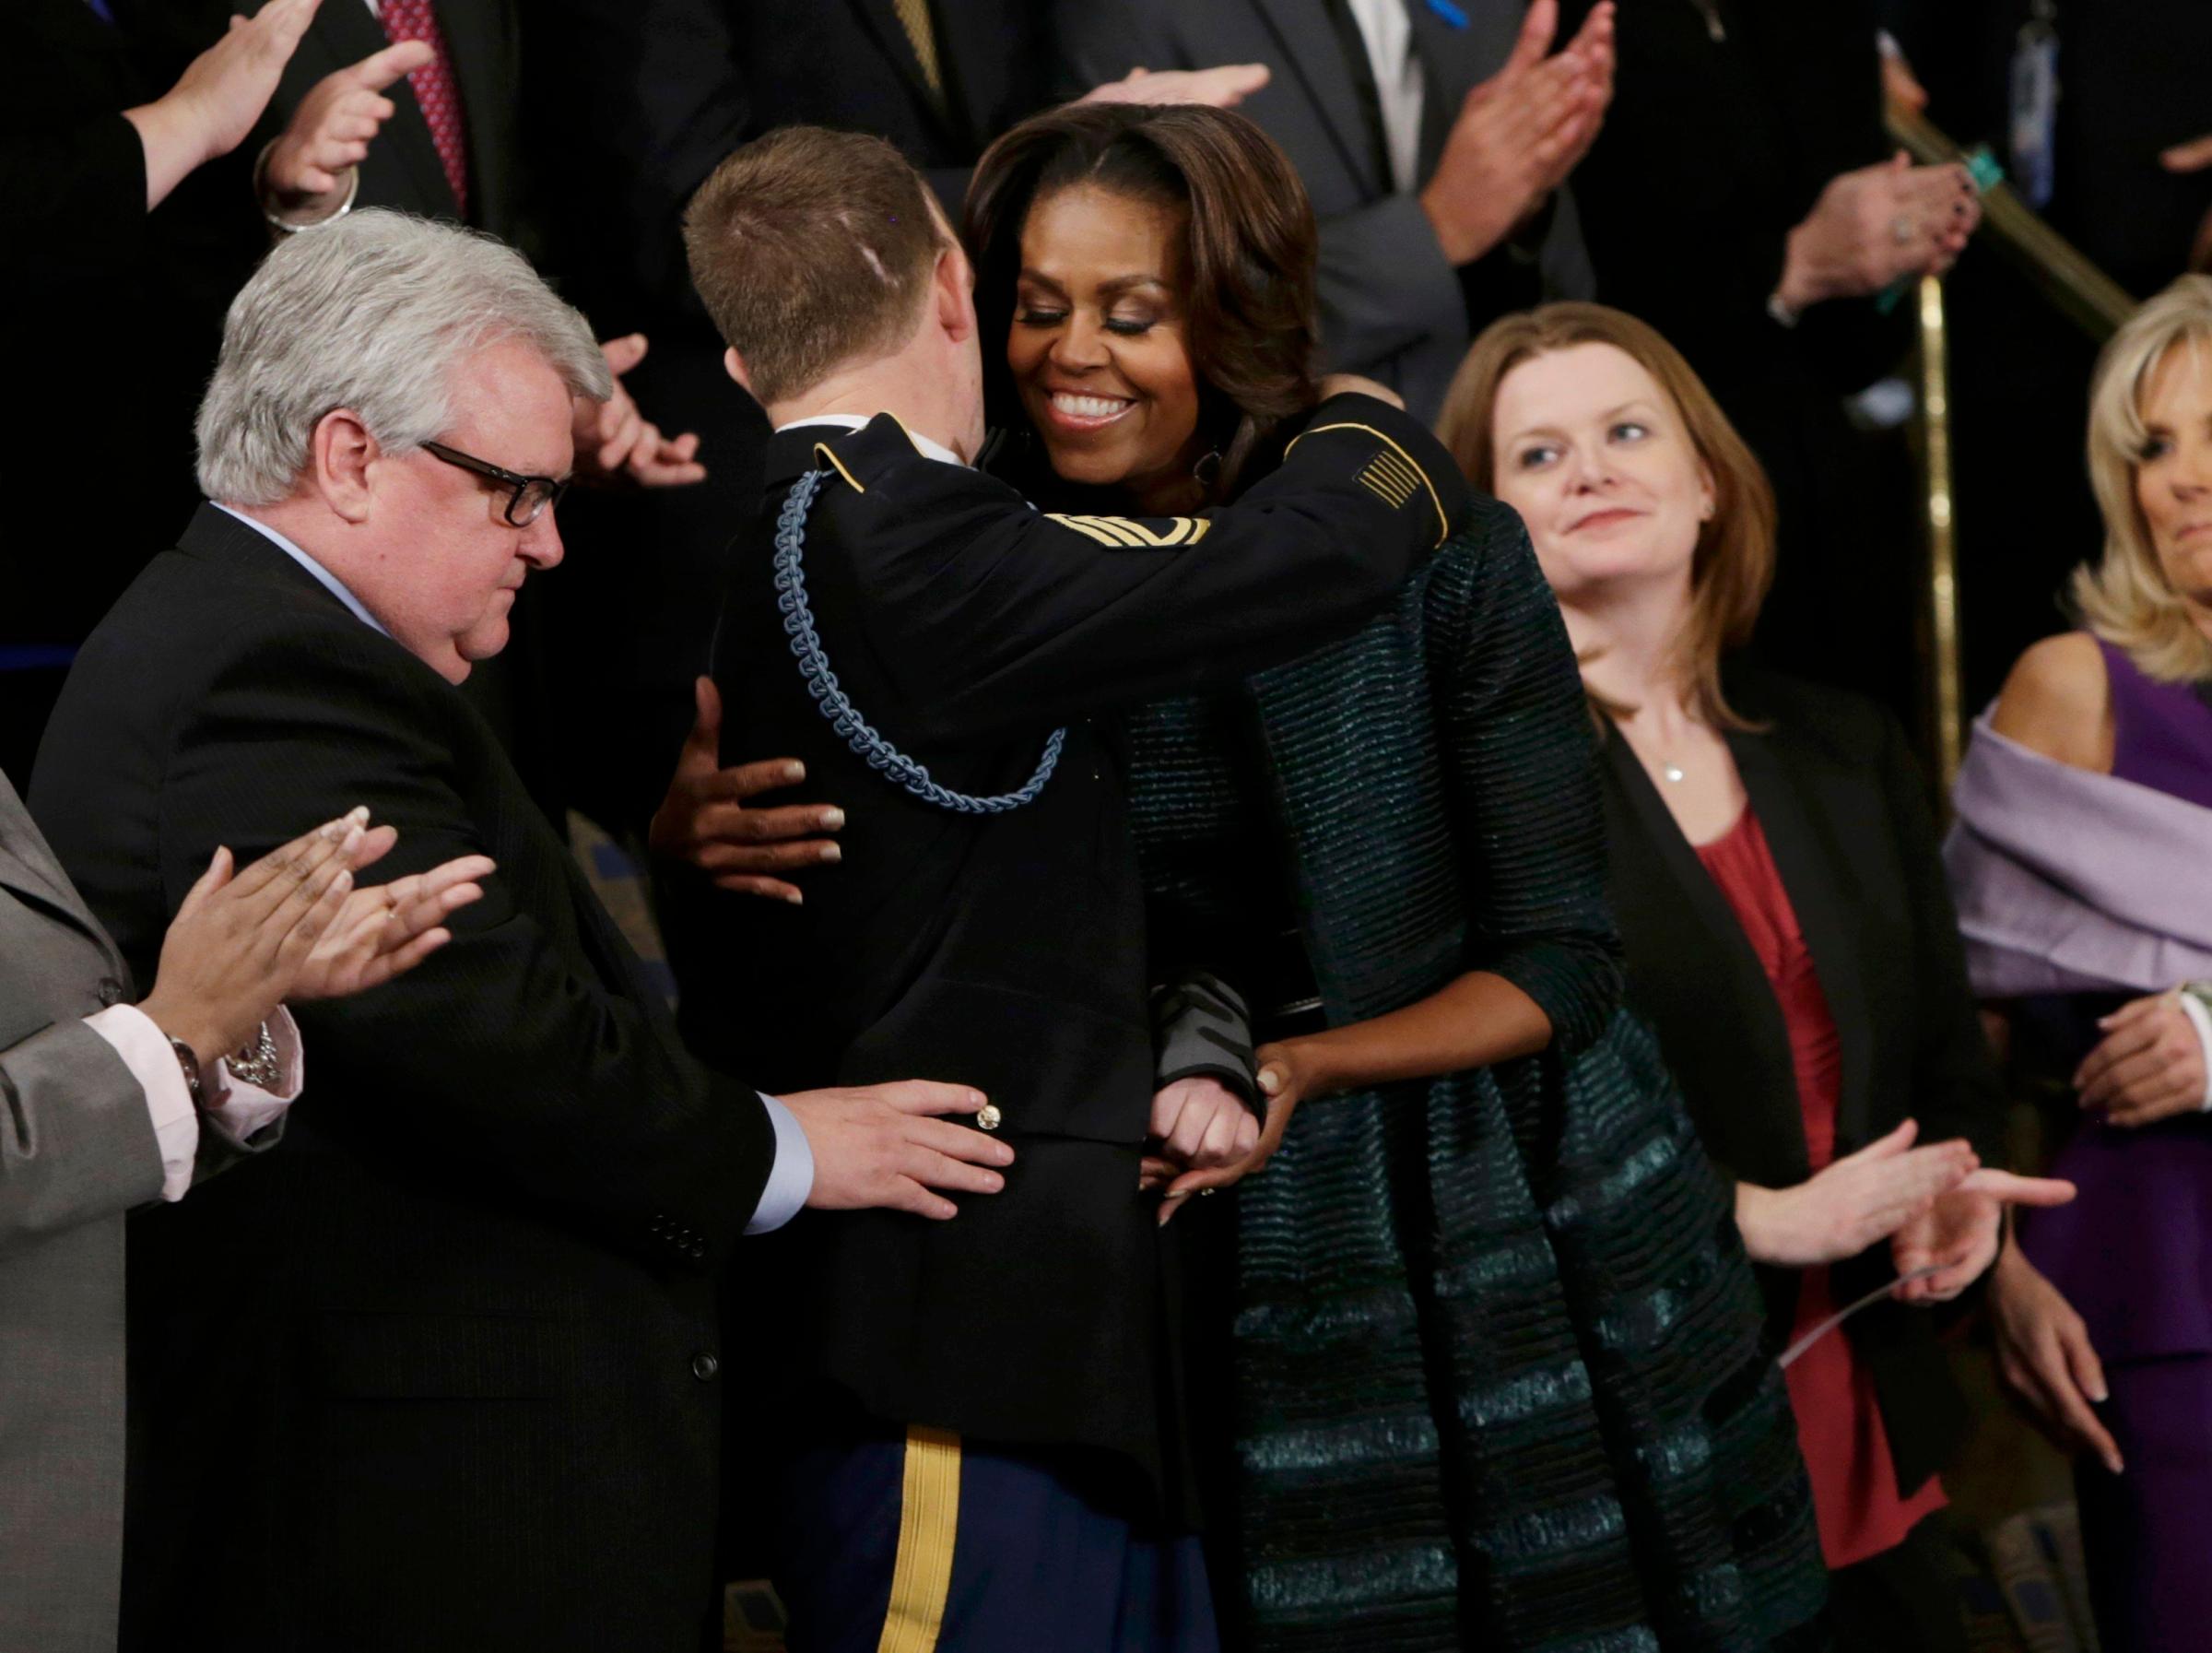 First Lady Michelle Obama hugs U.S. Army Ranger Sgt. First Class Cory Remsburg, who was injured while serving in Afghanistan.